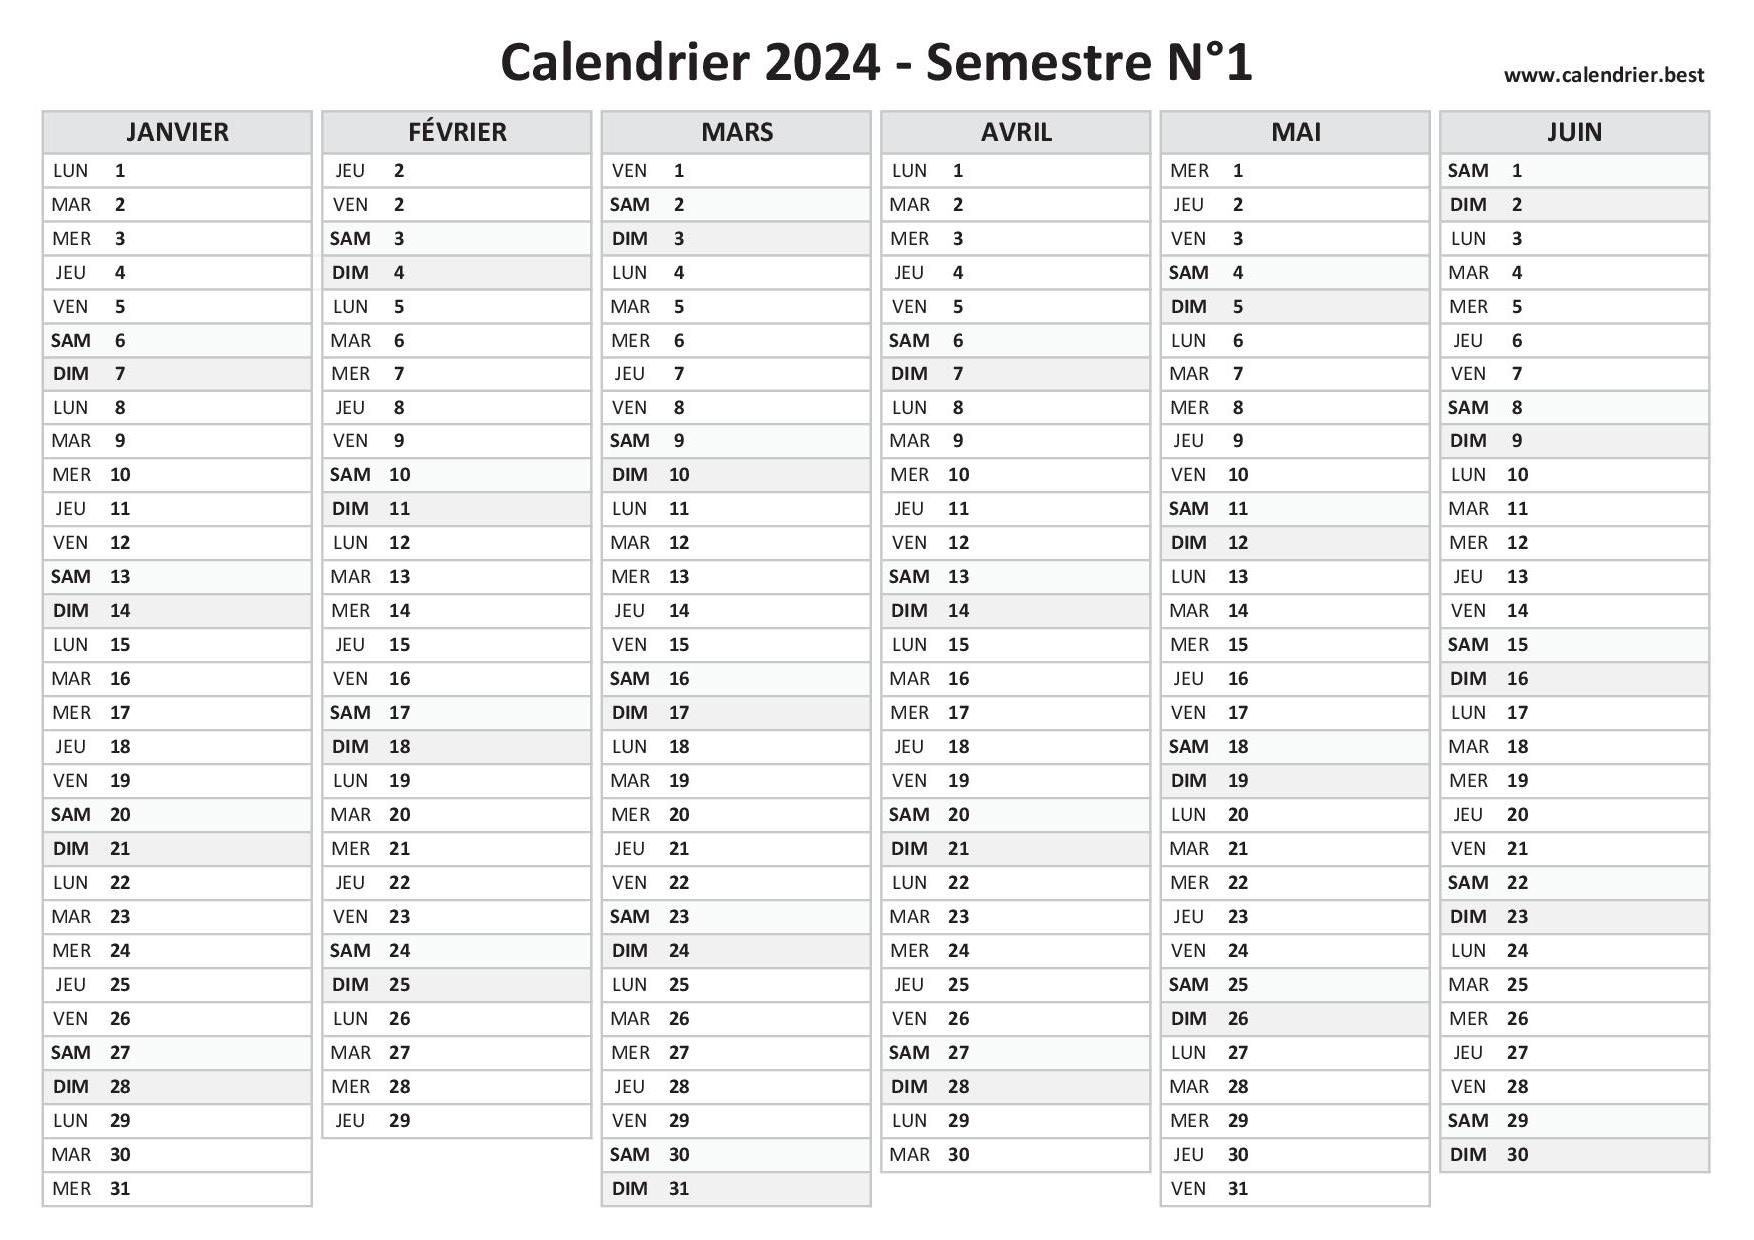 calendrier familial 2024, Turnowsky , 1 mois / page 